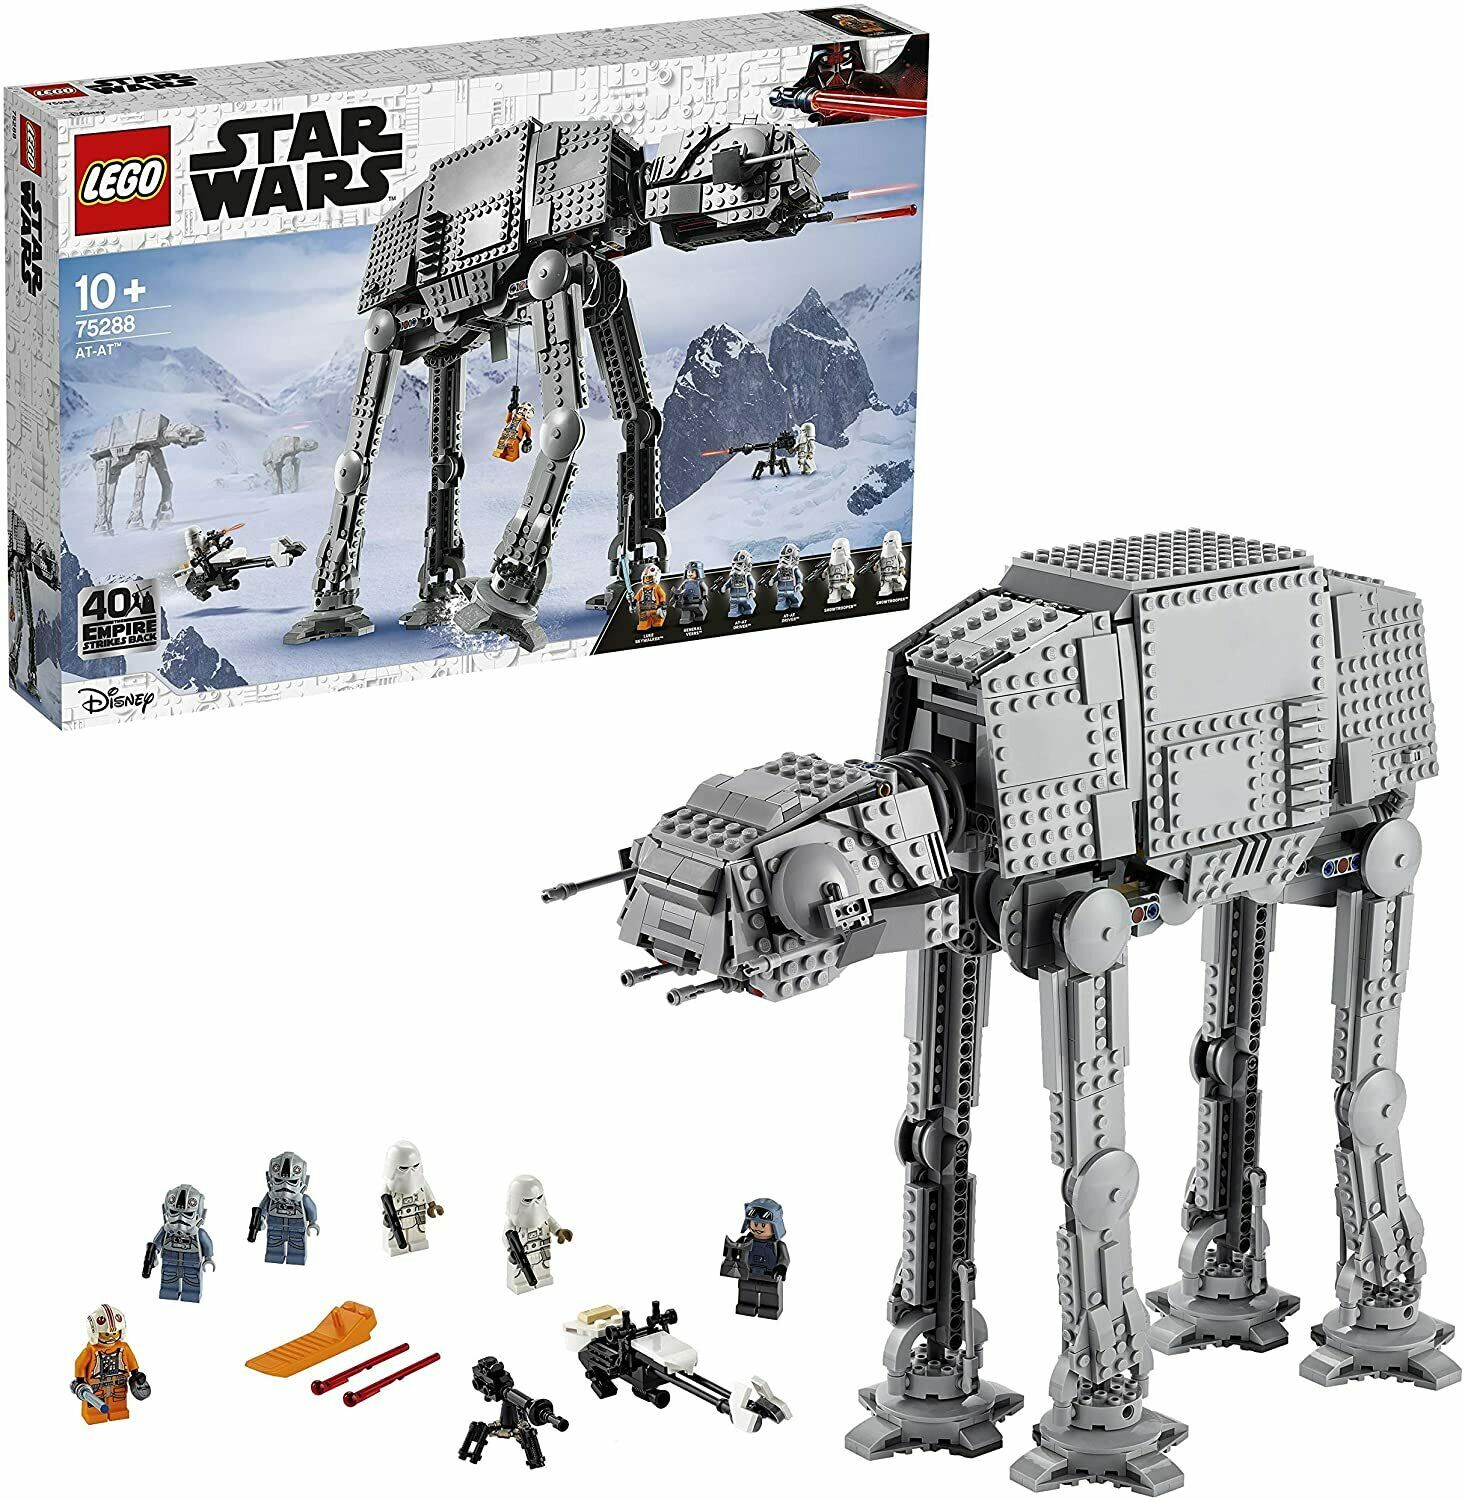 *BRAND NEW* LEGO Star Wars | AT-AT 75288 | Shipped from Melbourne